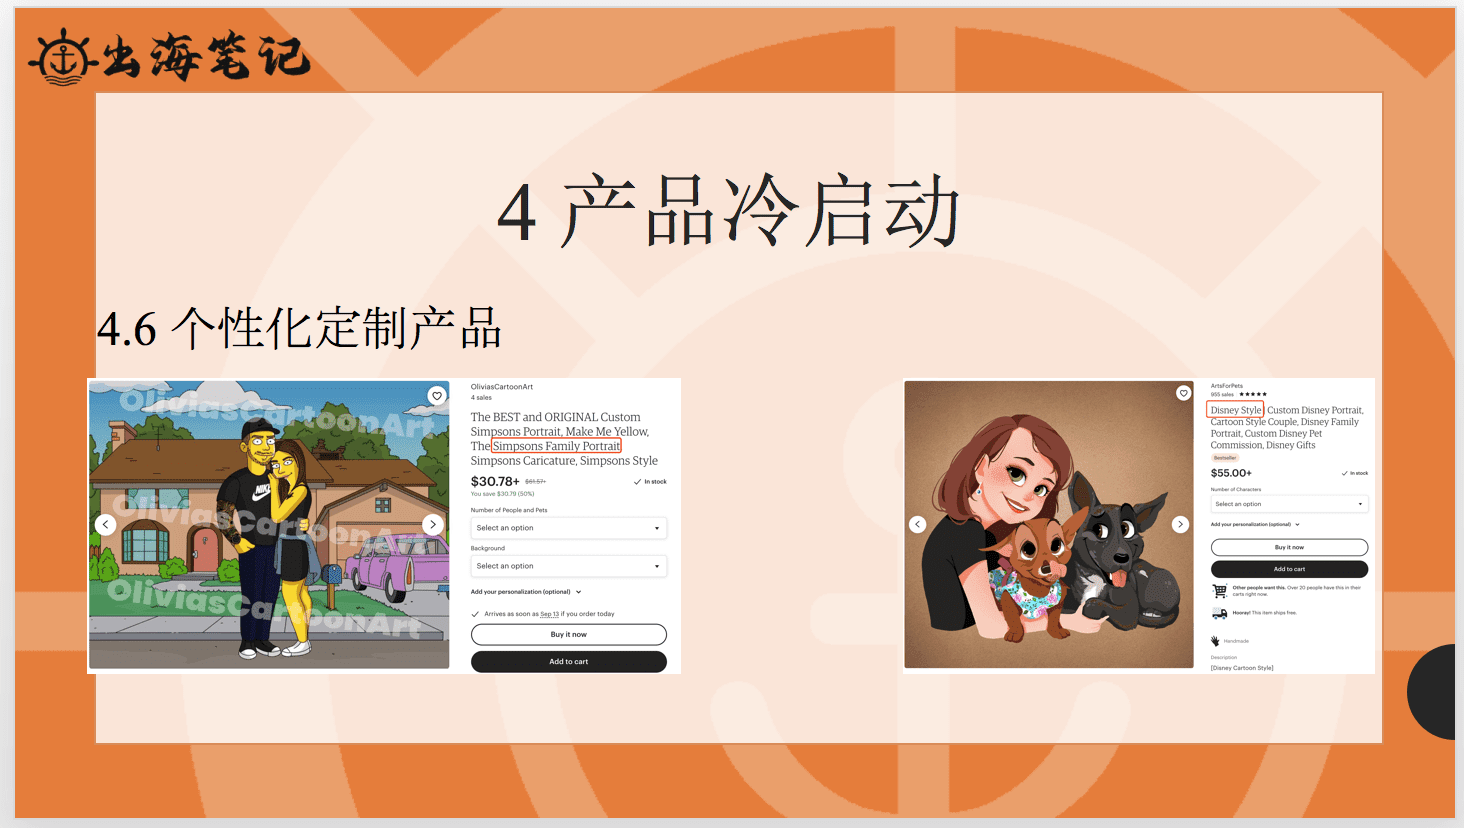 ../../../../../Library/Containers/com.tencent.xinWeChat/Data/Library/Application%20Support/com.tencent.xinWeChat/2.0b4.0.9/751a8330357af107f5510d92bd4cae49/Message/MessageTemp/7f5b1409289e7572d6932dc34cf84534/Image/1831600779408_.pic_hd